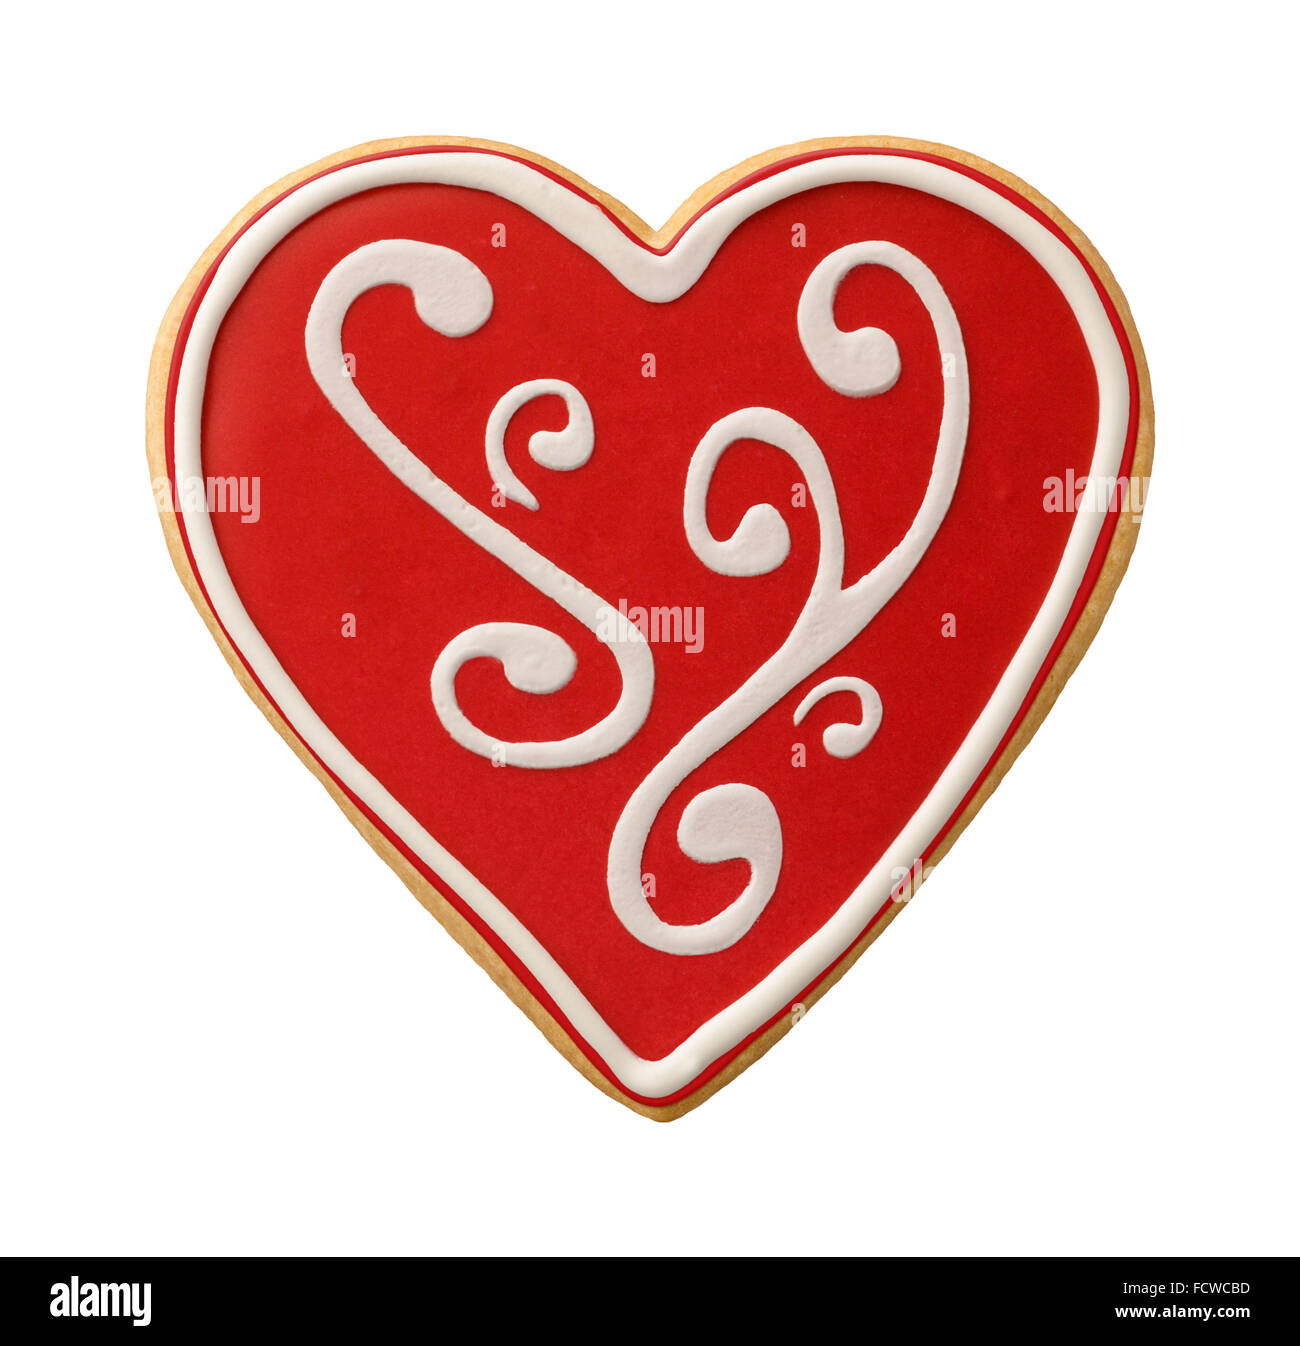 Heart Shaped Valentine Cookie isolated, with scroll work icing. Stock Photo